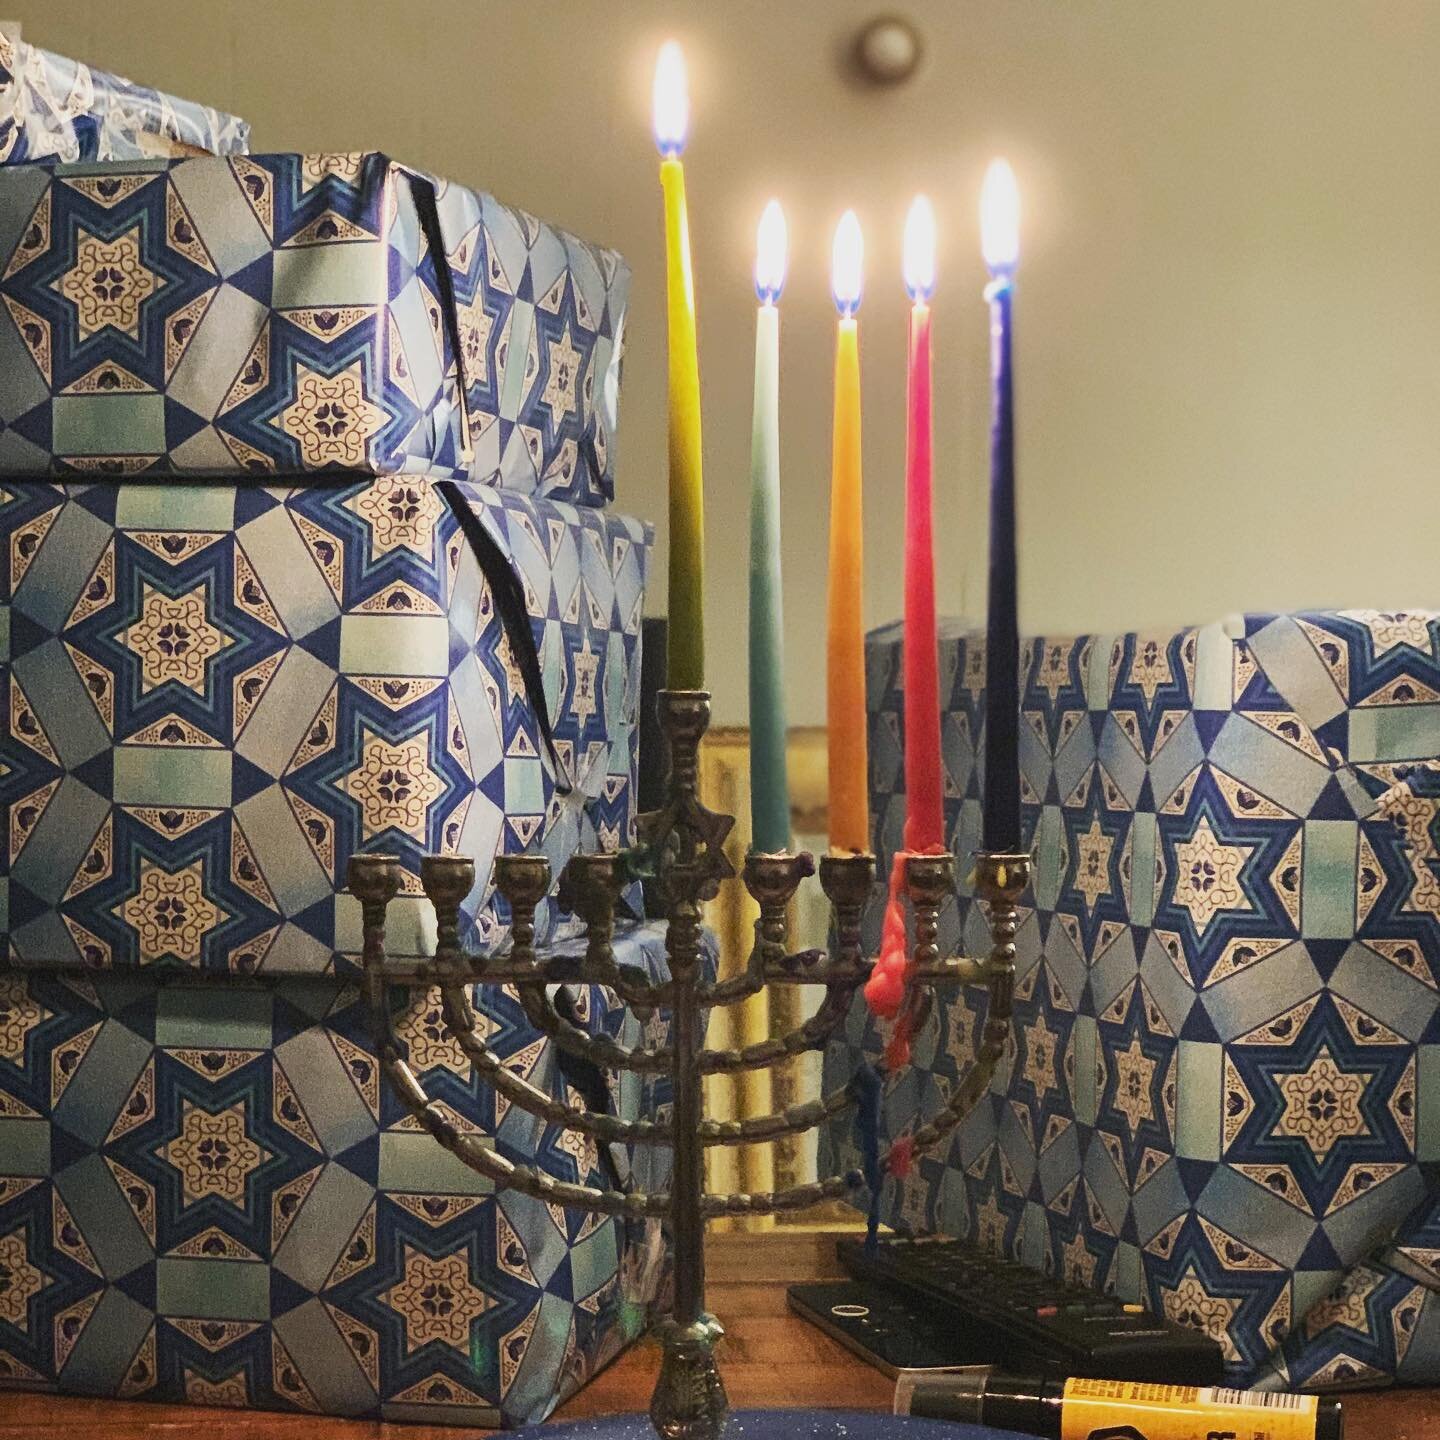 Happy Hanukkah everyone!! I told the shiksa @semooree to cover her head for the prayers. Enjoy the holiday season everyone! Sending you love and good vibes of safety and prosperity round the world! #happyhanukkah